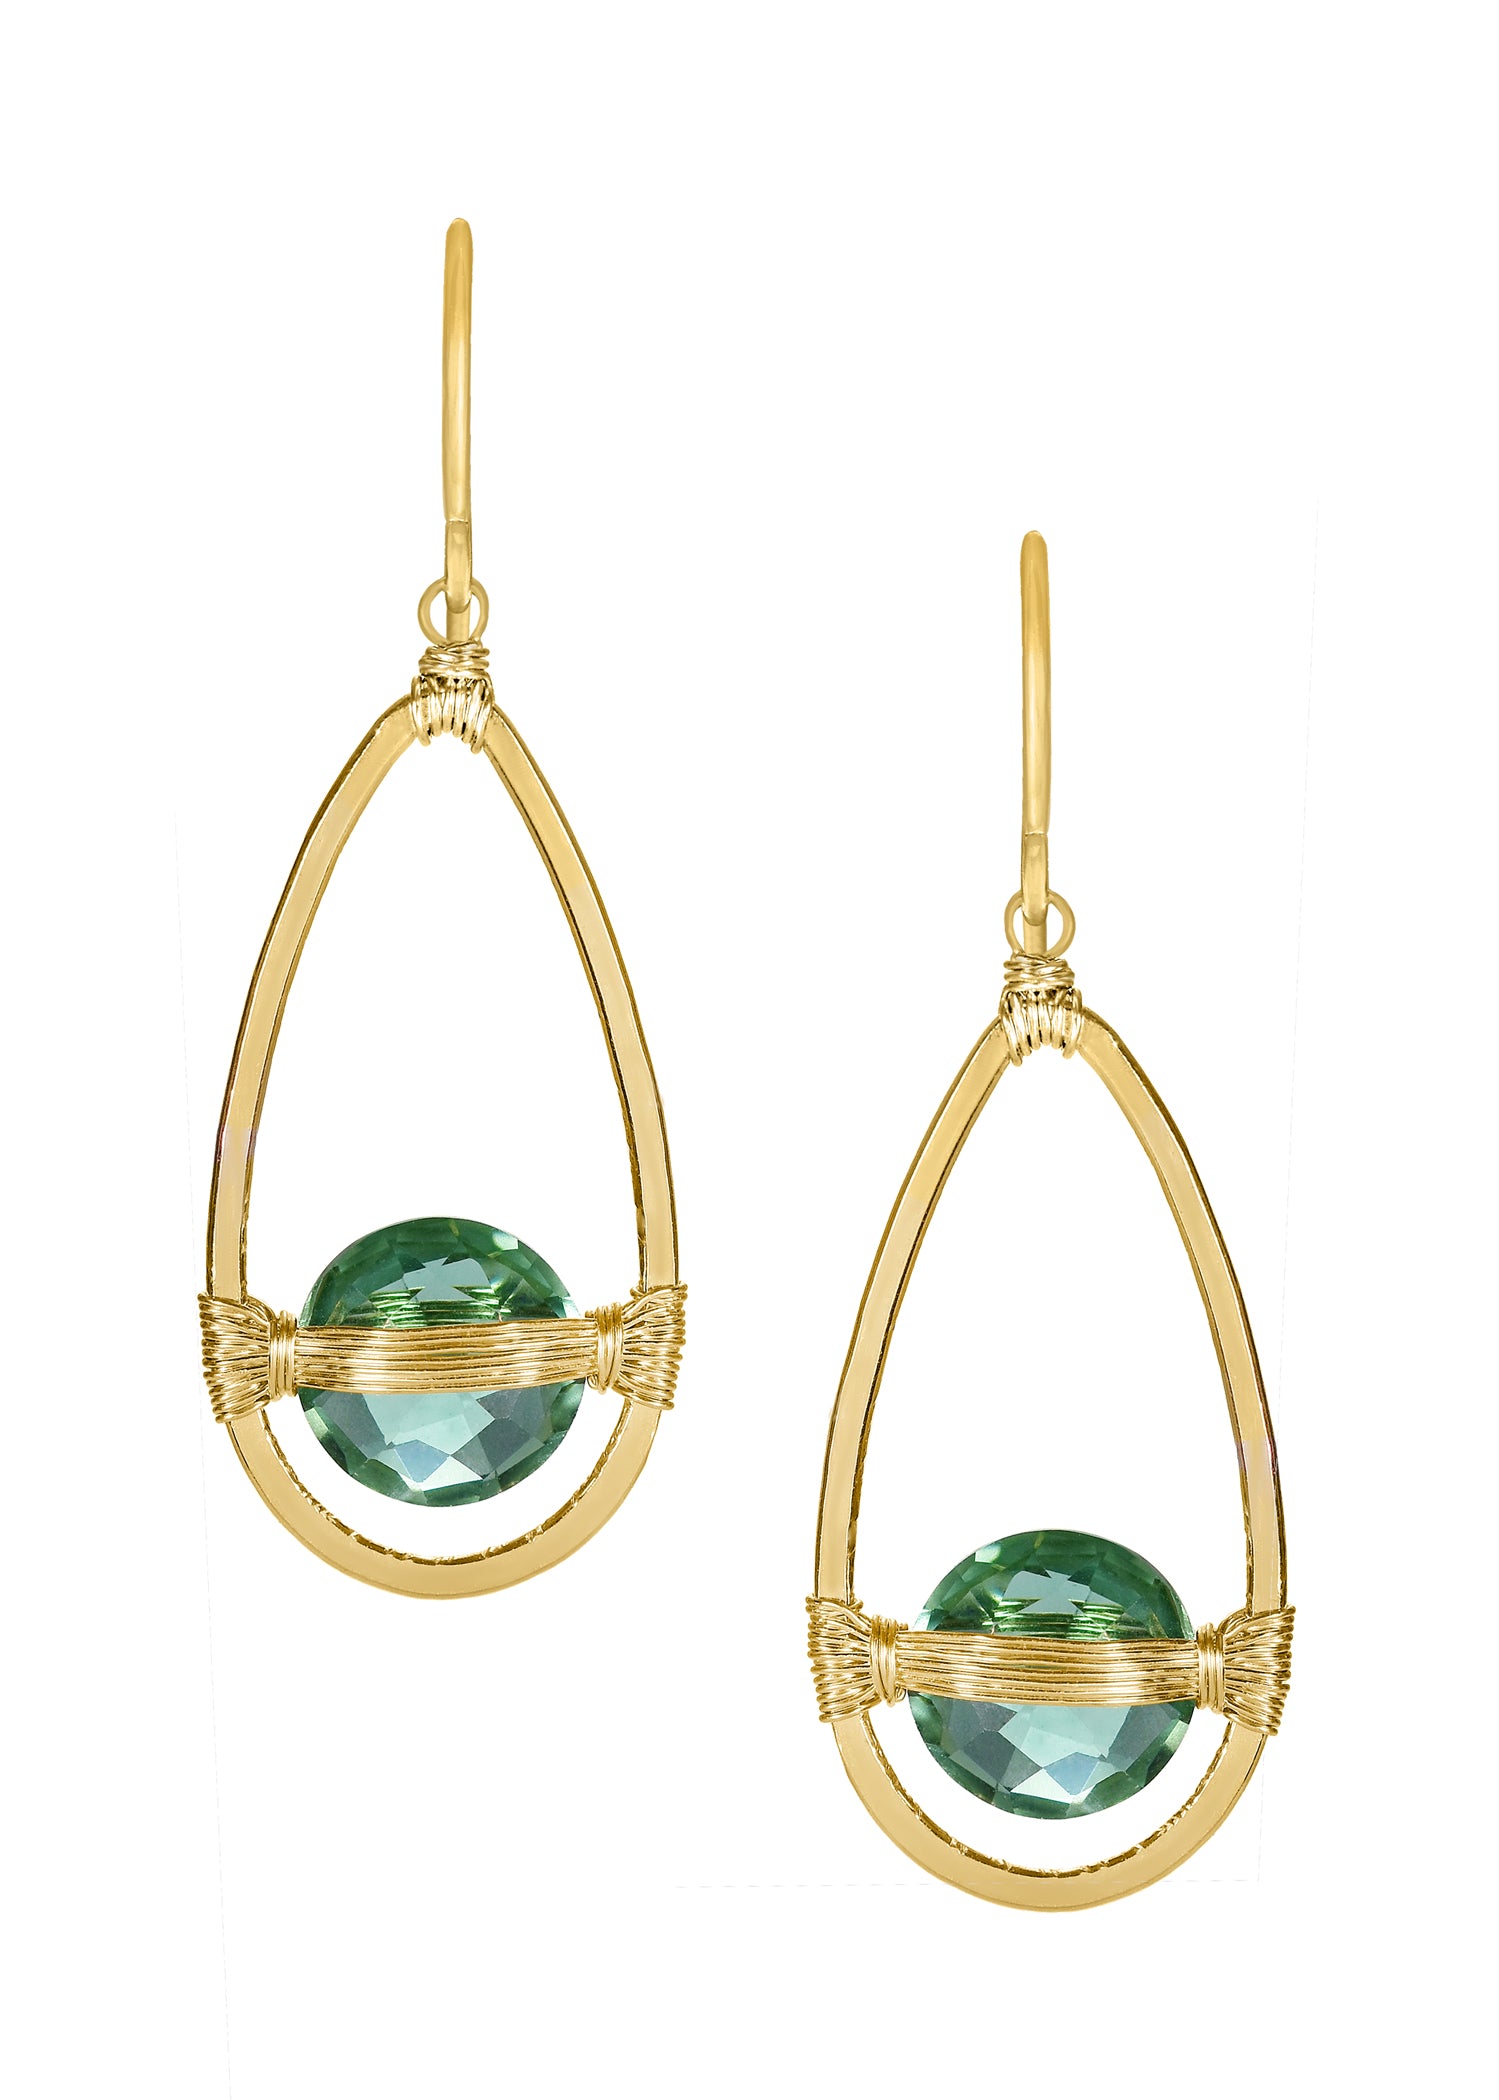 Green quartz 14k gold fill Earrings measure 1-1/2" in length (including the ear wires) and 1/2" in width at the widest point Handmade in our Los Angeles studio